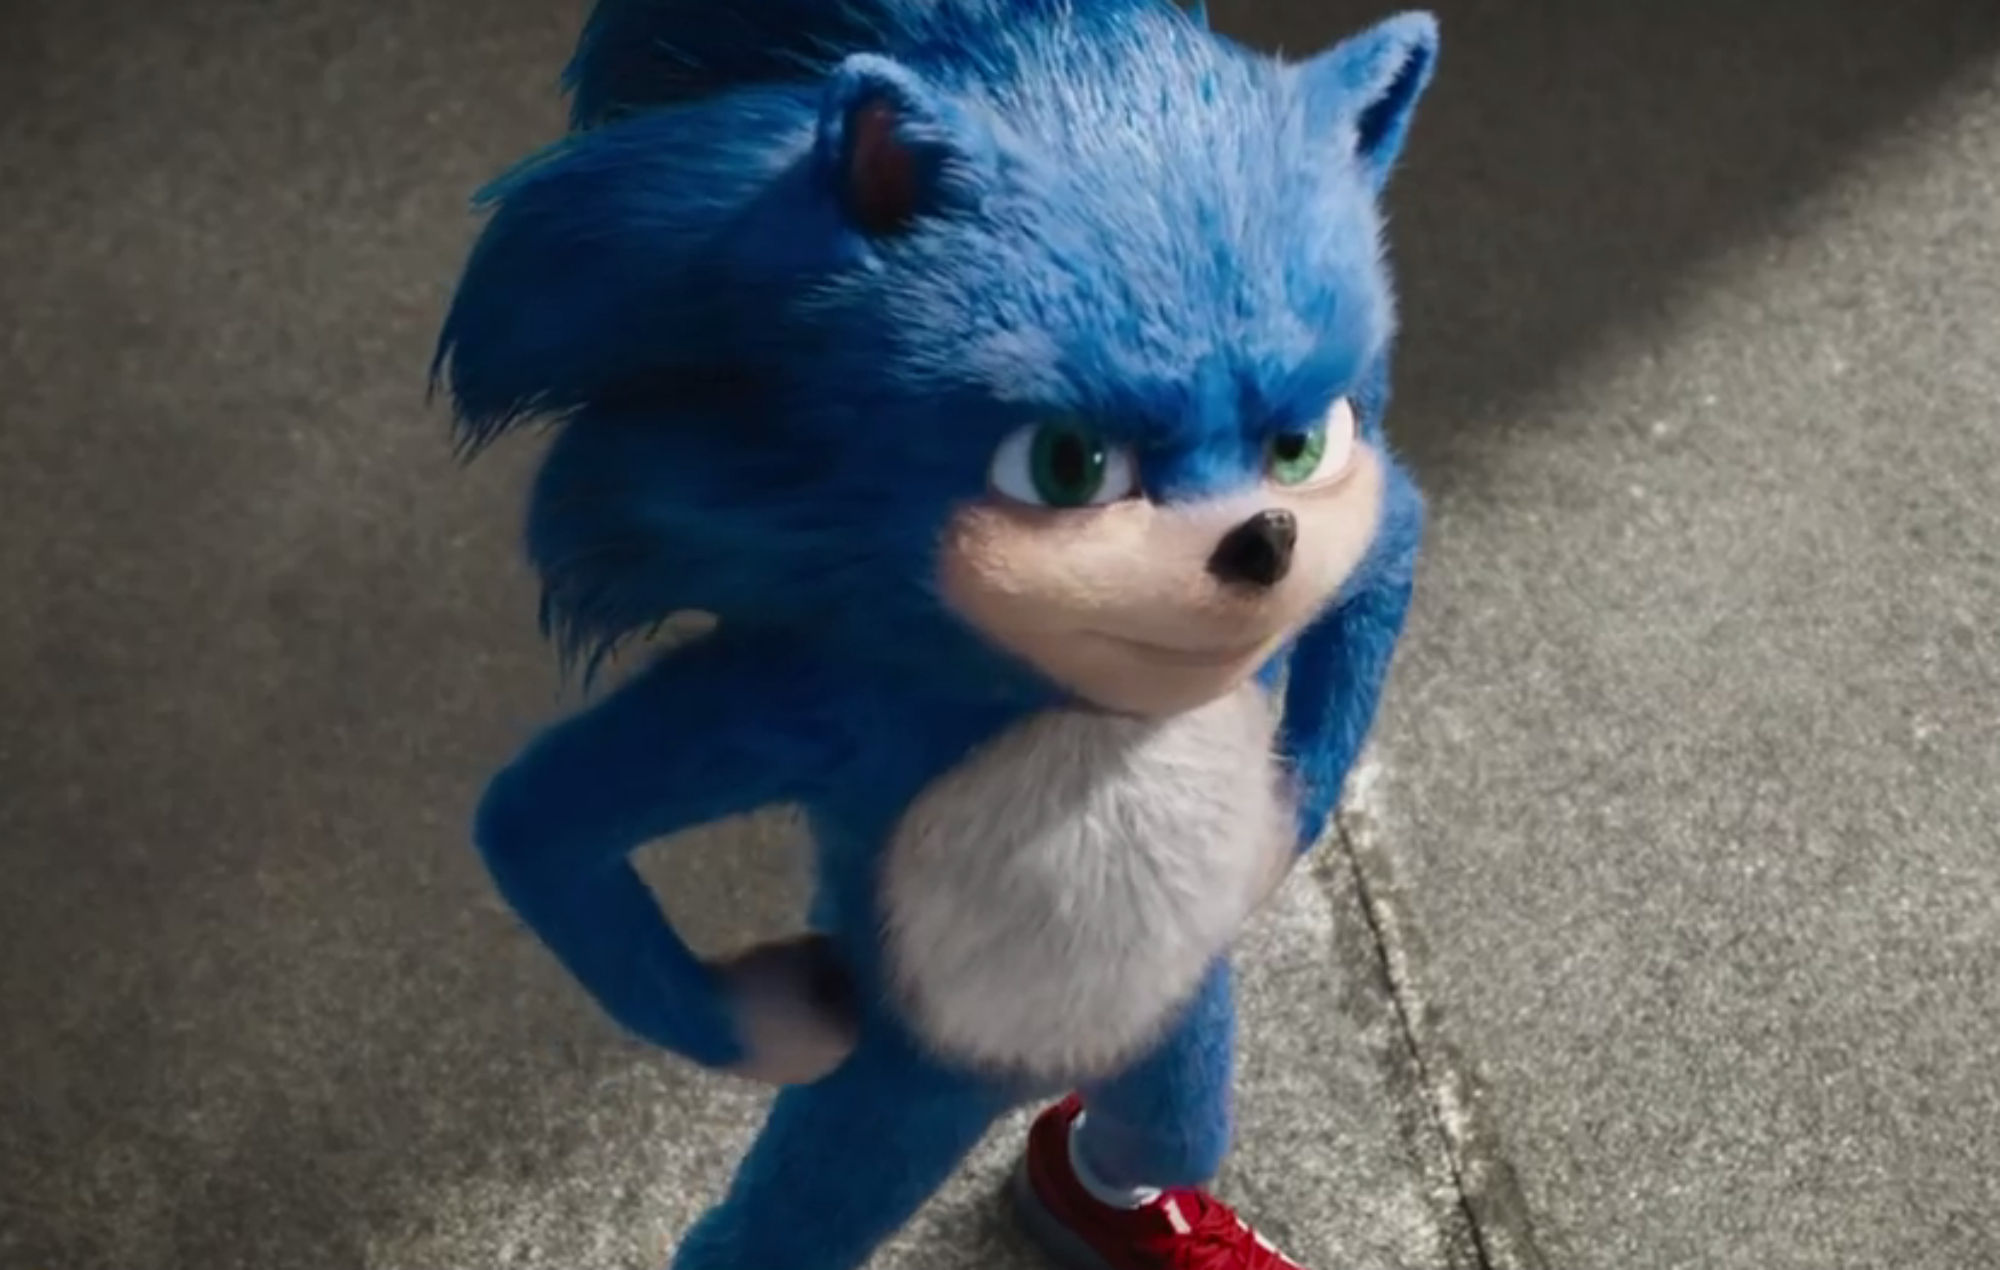 Sonic The Hedgehog Movie to get a visual overhaul - 9to5Toys